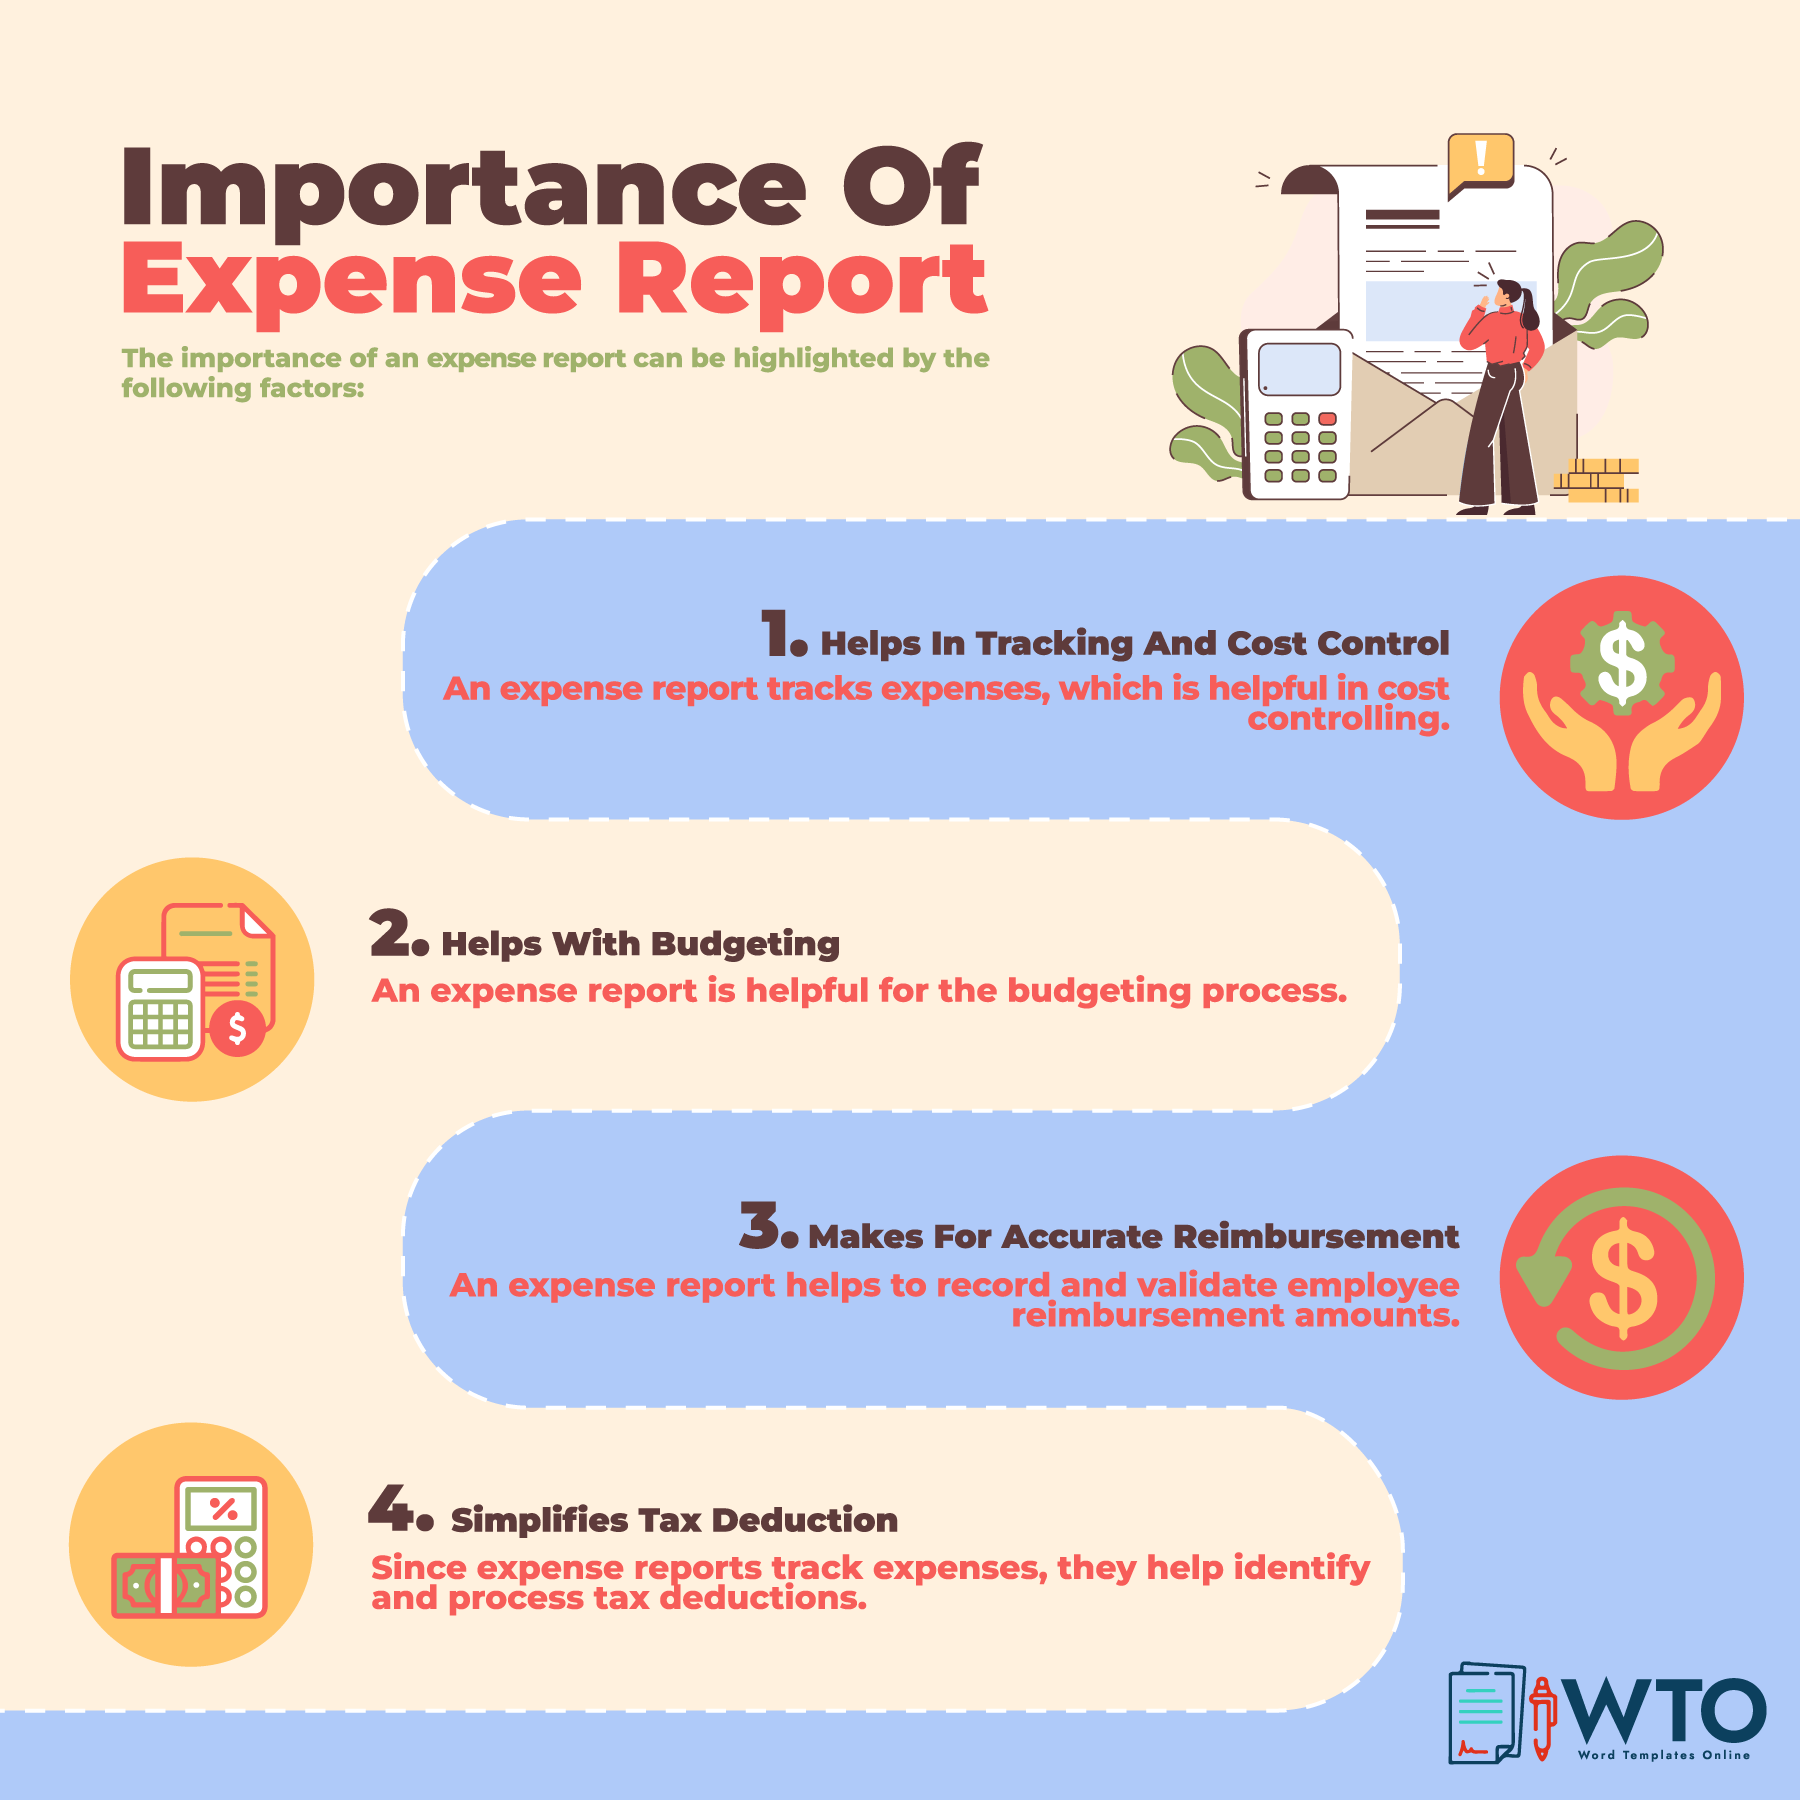 This infographic signifies the importance of expense report.